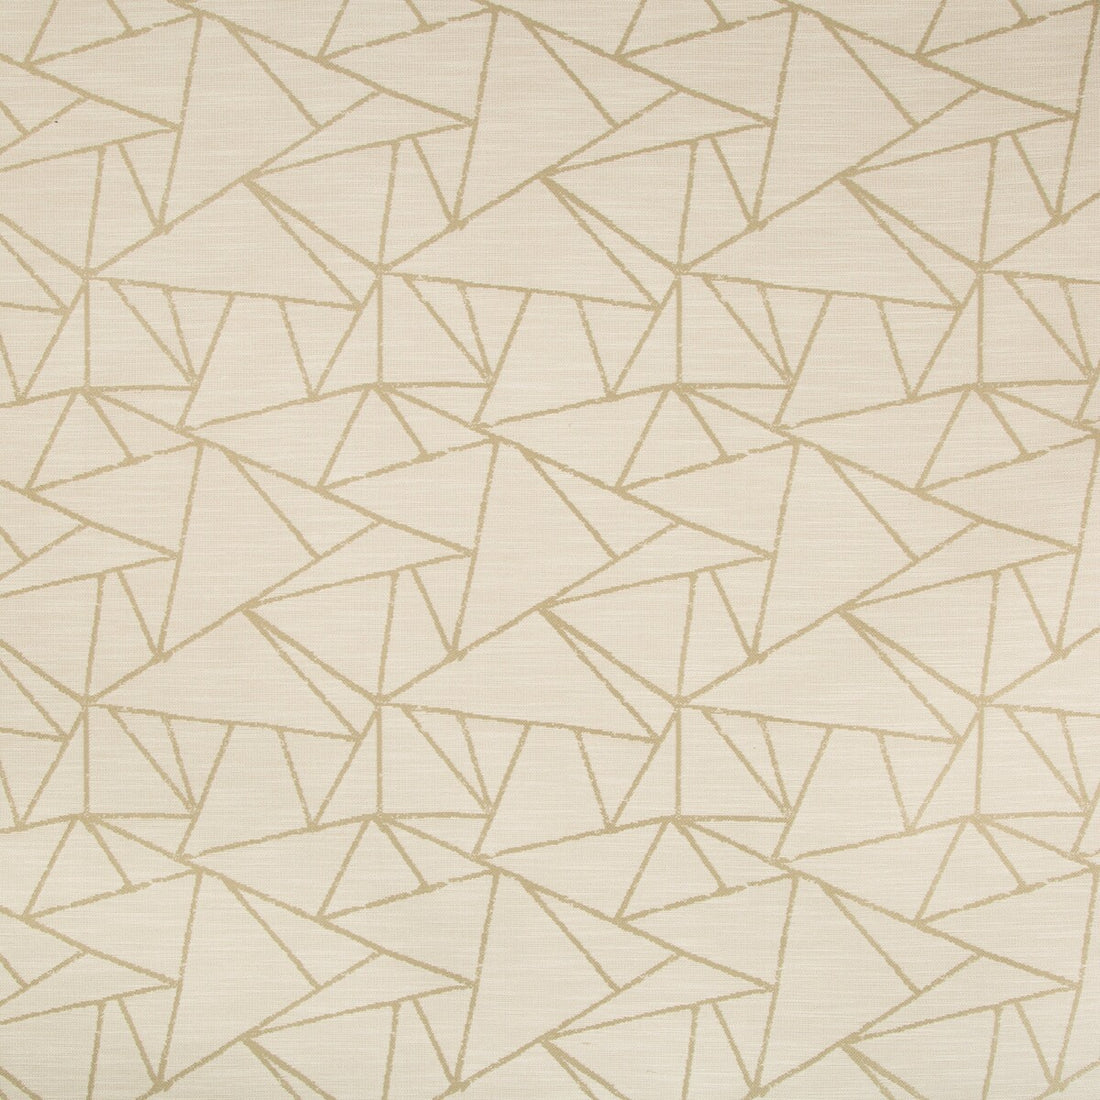 Kravet Design fabric in 35001-16 color - pattern 35001.16.0 - by Kravet Design in the Performance Crypton Home collection